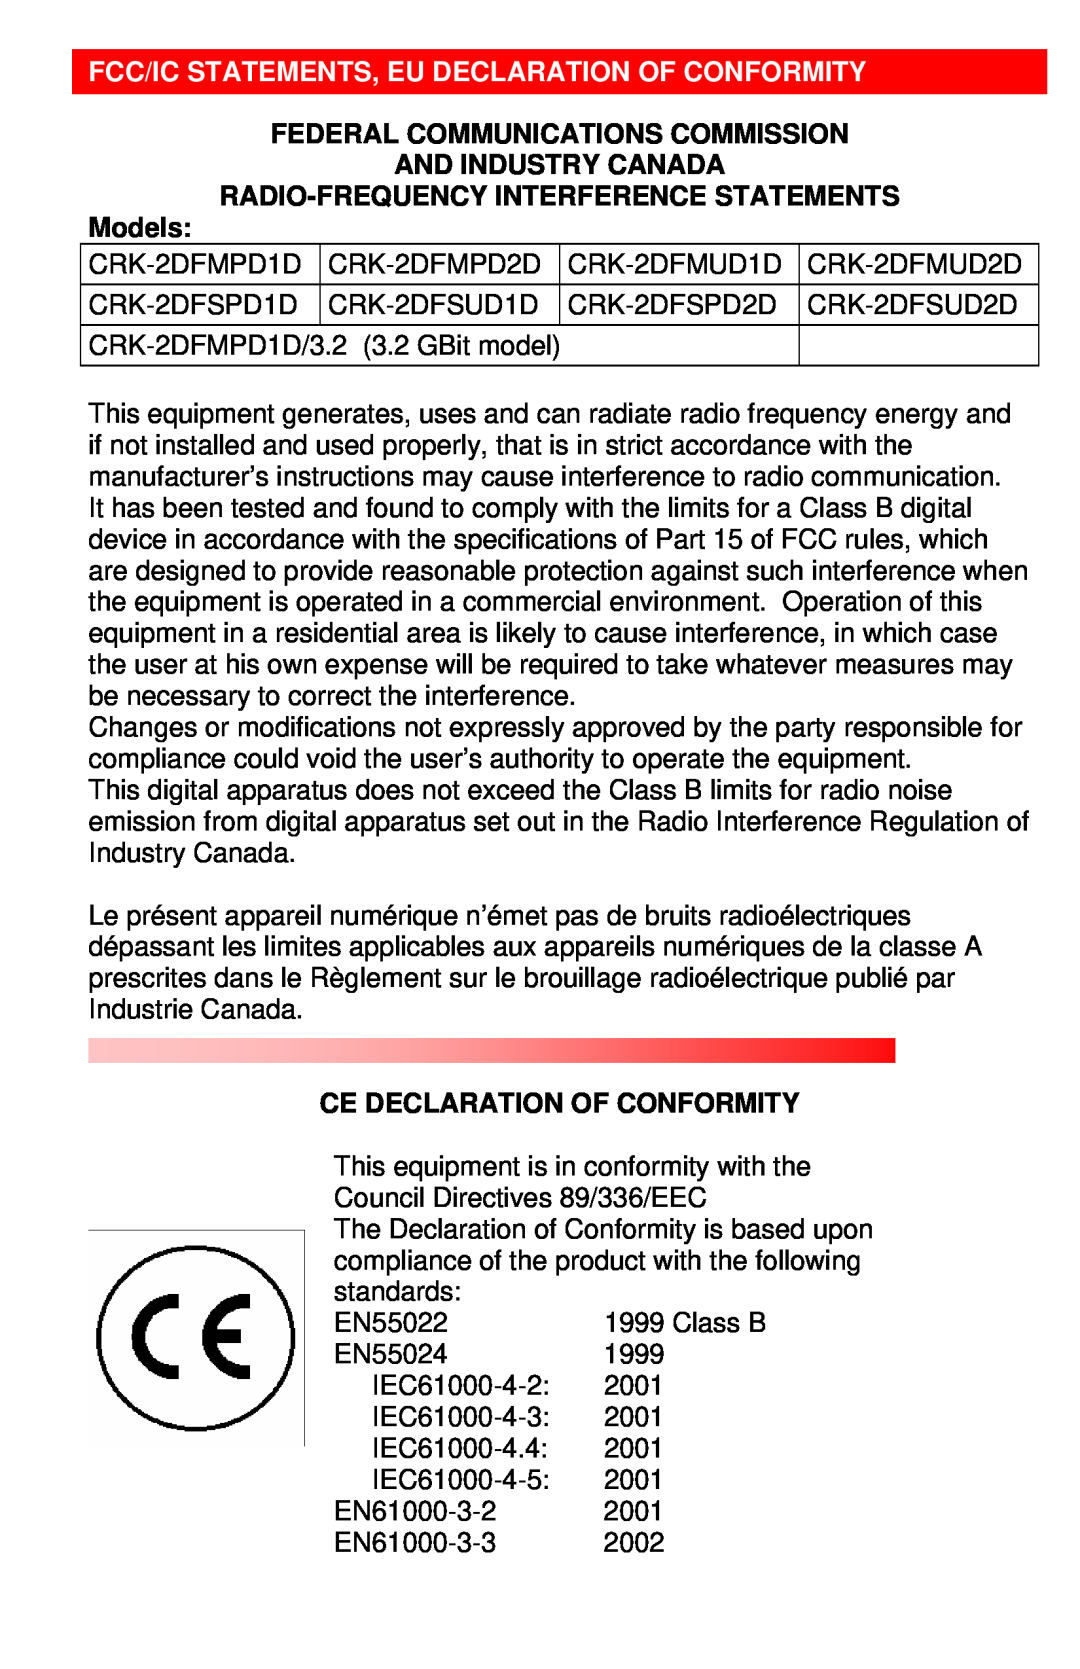 Rose electronic CRK-2DFMPD2D manual Federal Communications Commission And Industry Canada, Ce Declaration Of Conformity 